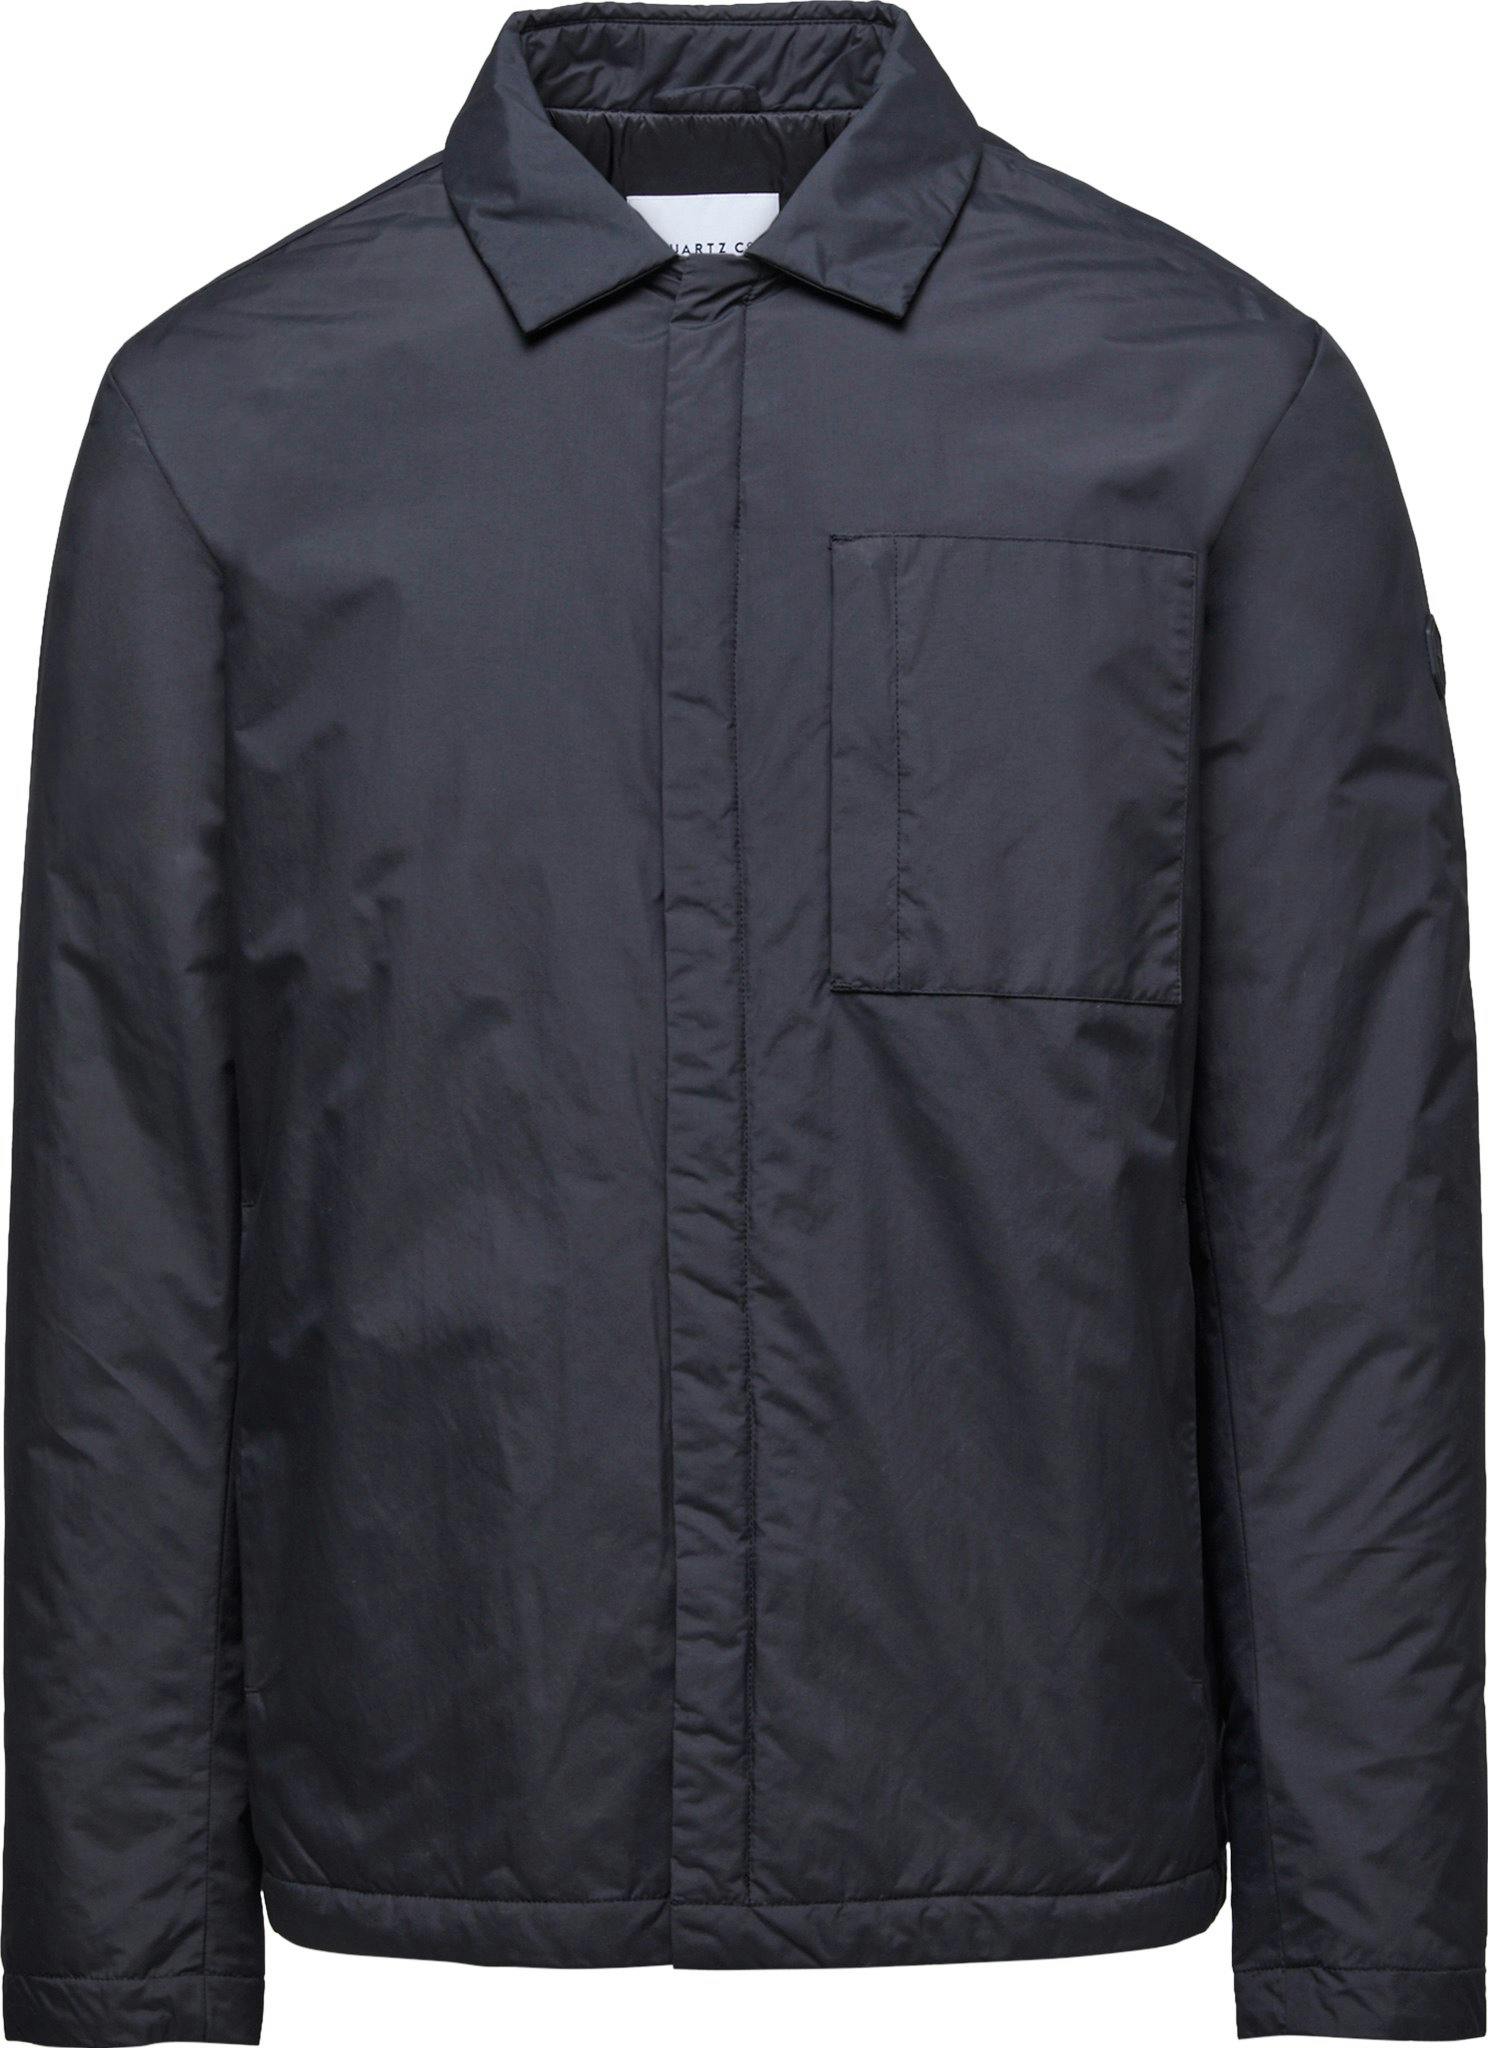 Product image for Harrison Insulated Shirt Jacket - Slim-Straight - Men's